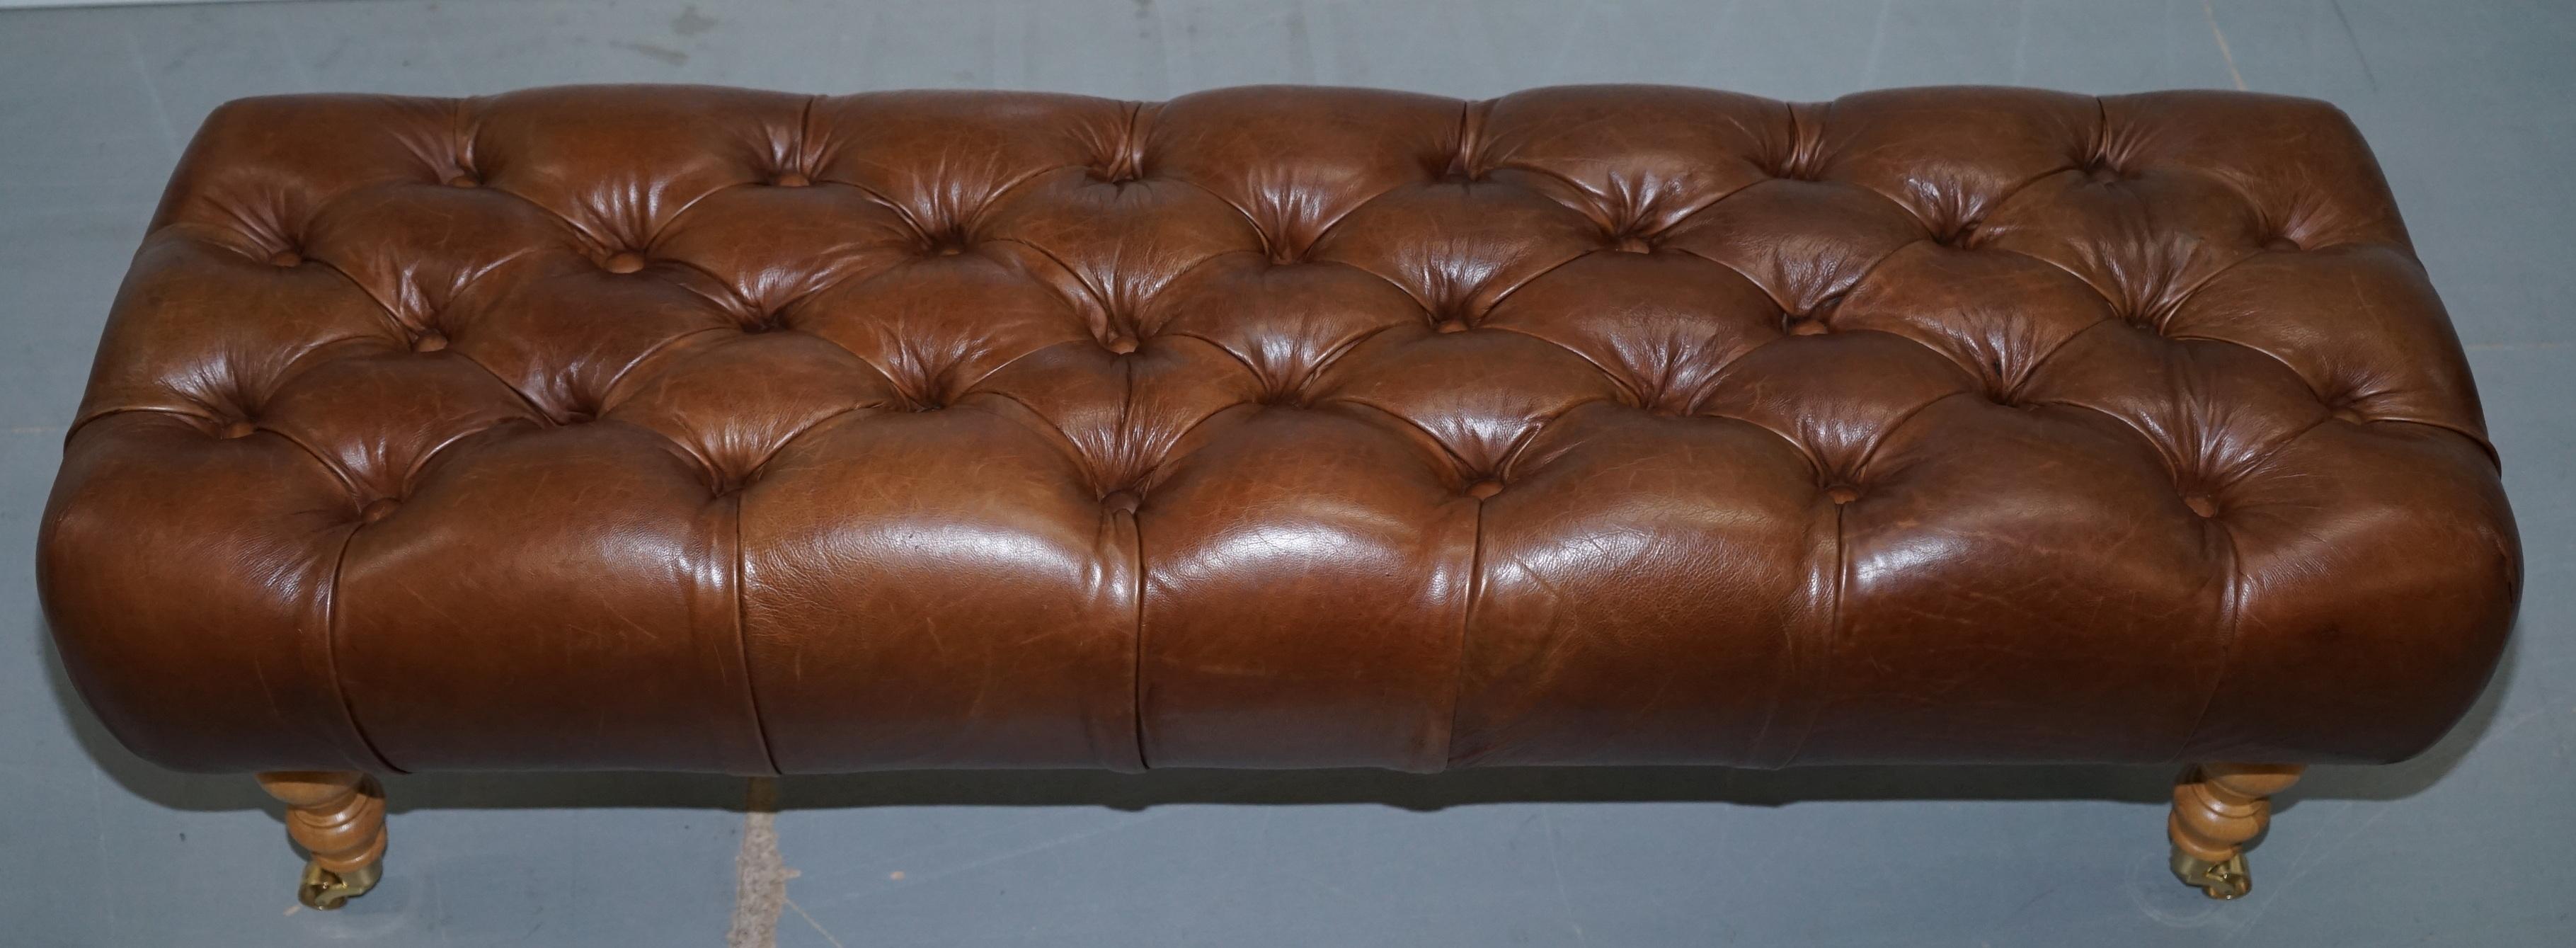 Hand-Carved Three Person Bench Footstool Chesterfield Chestnut Leather Oak Legs Brass Castor